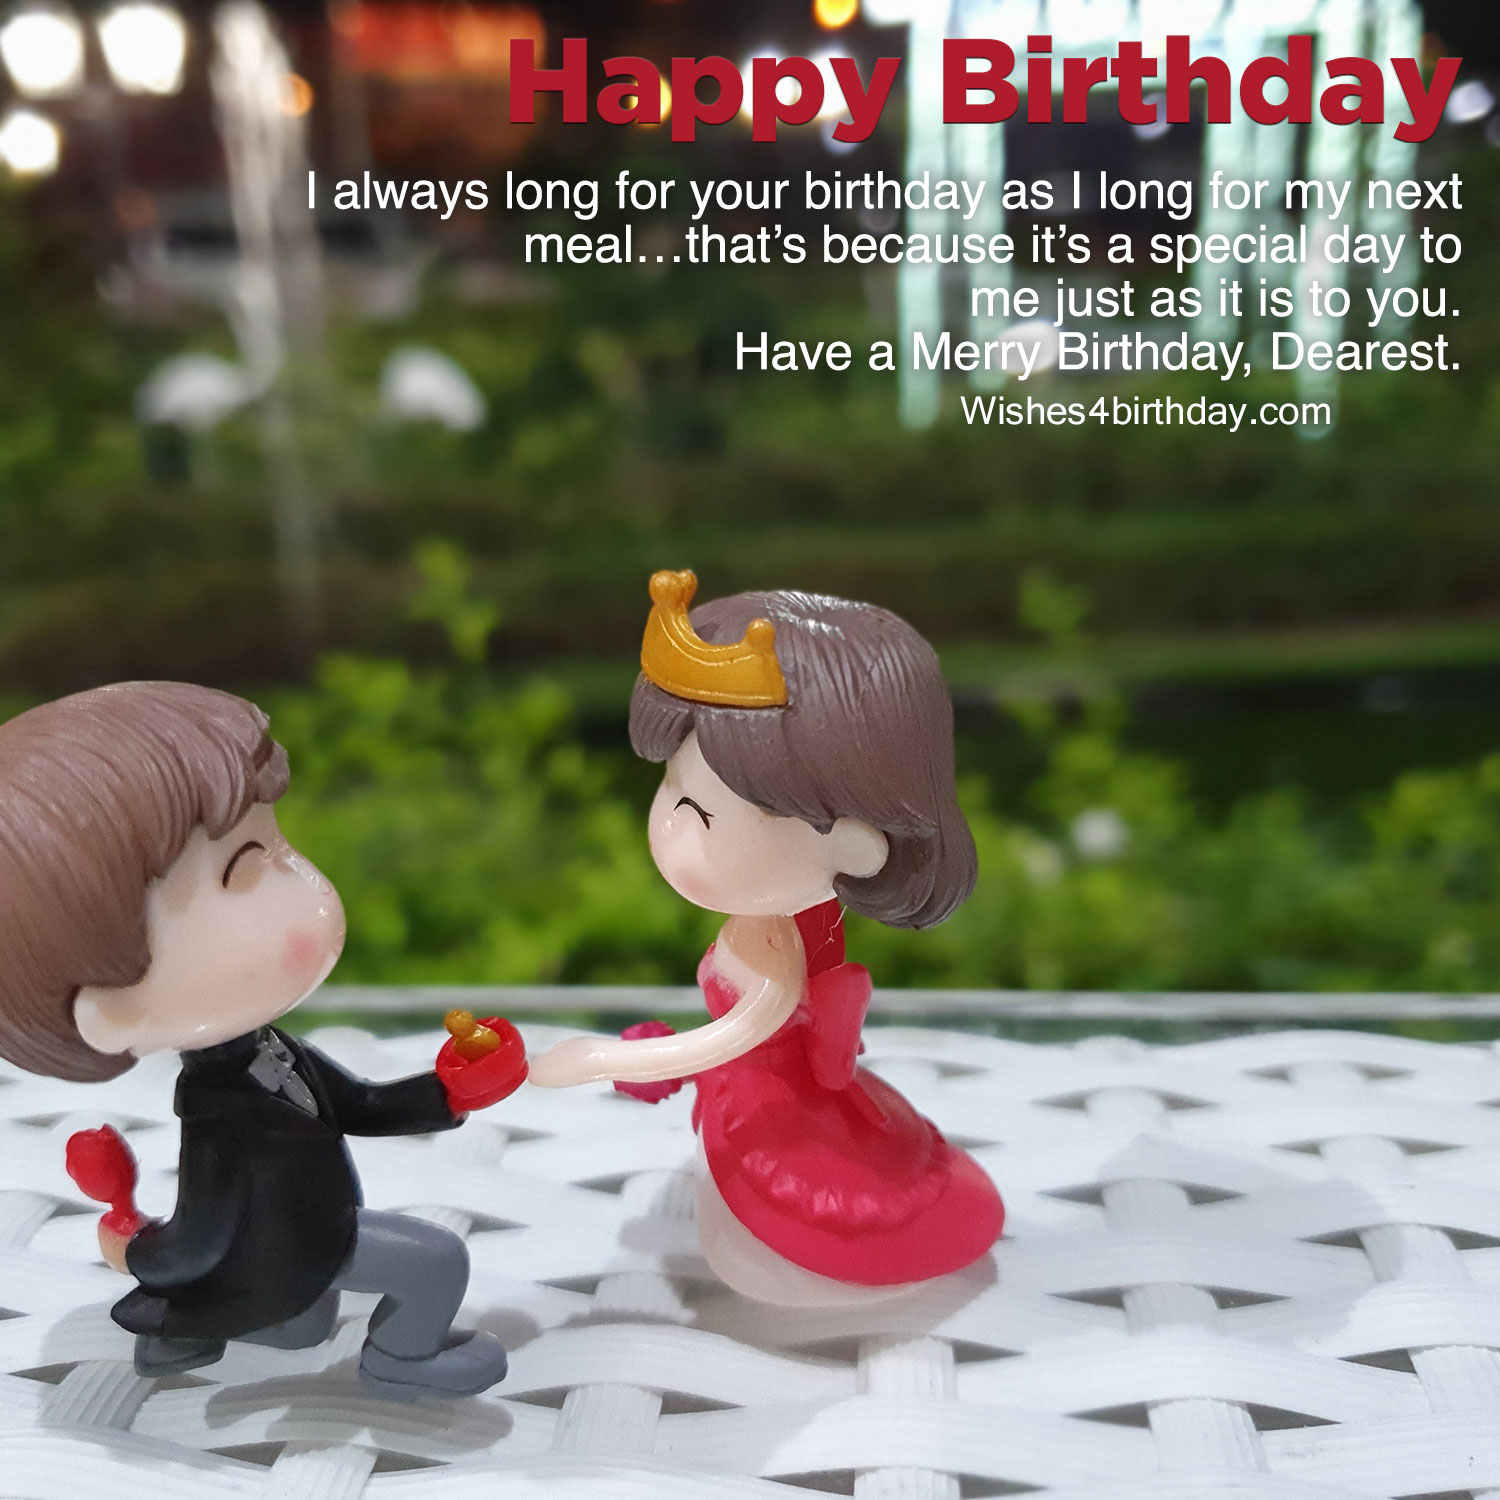 Top animated birthday images for her girlfriend - Happy Birthday Wishes,  Memes, SMS & Greeting eCard Images